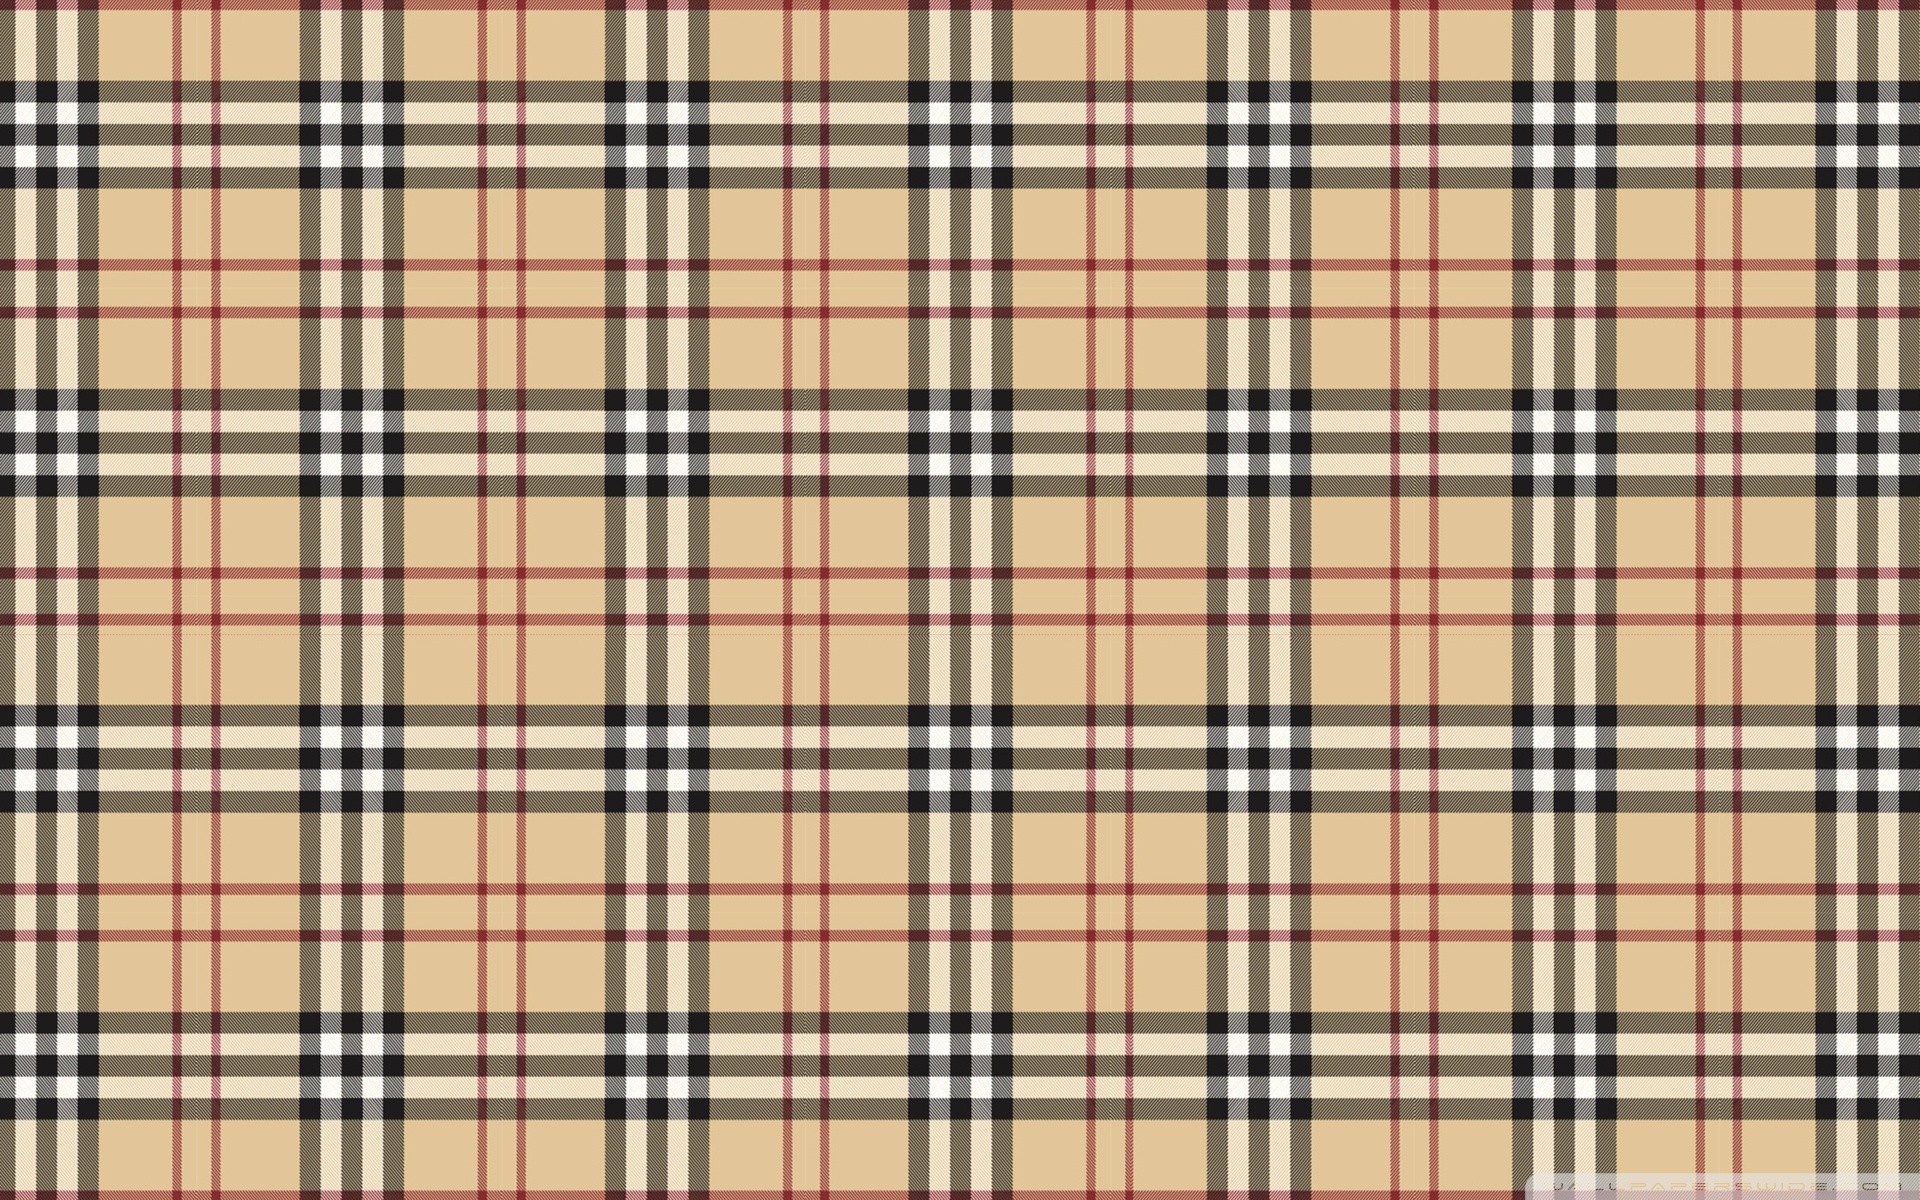 Burberry Wallpaper Hd posted by Christopher Tremblay